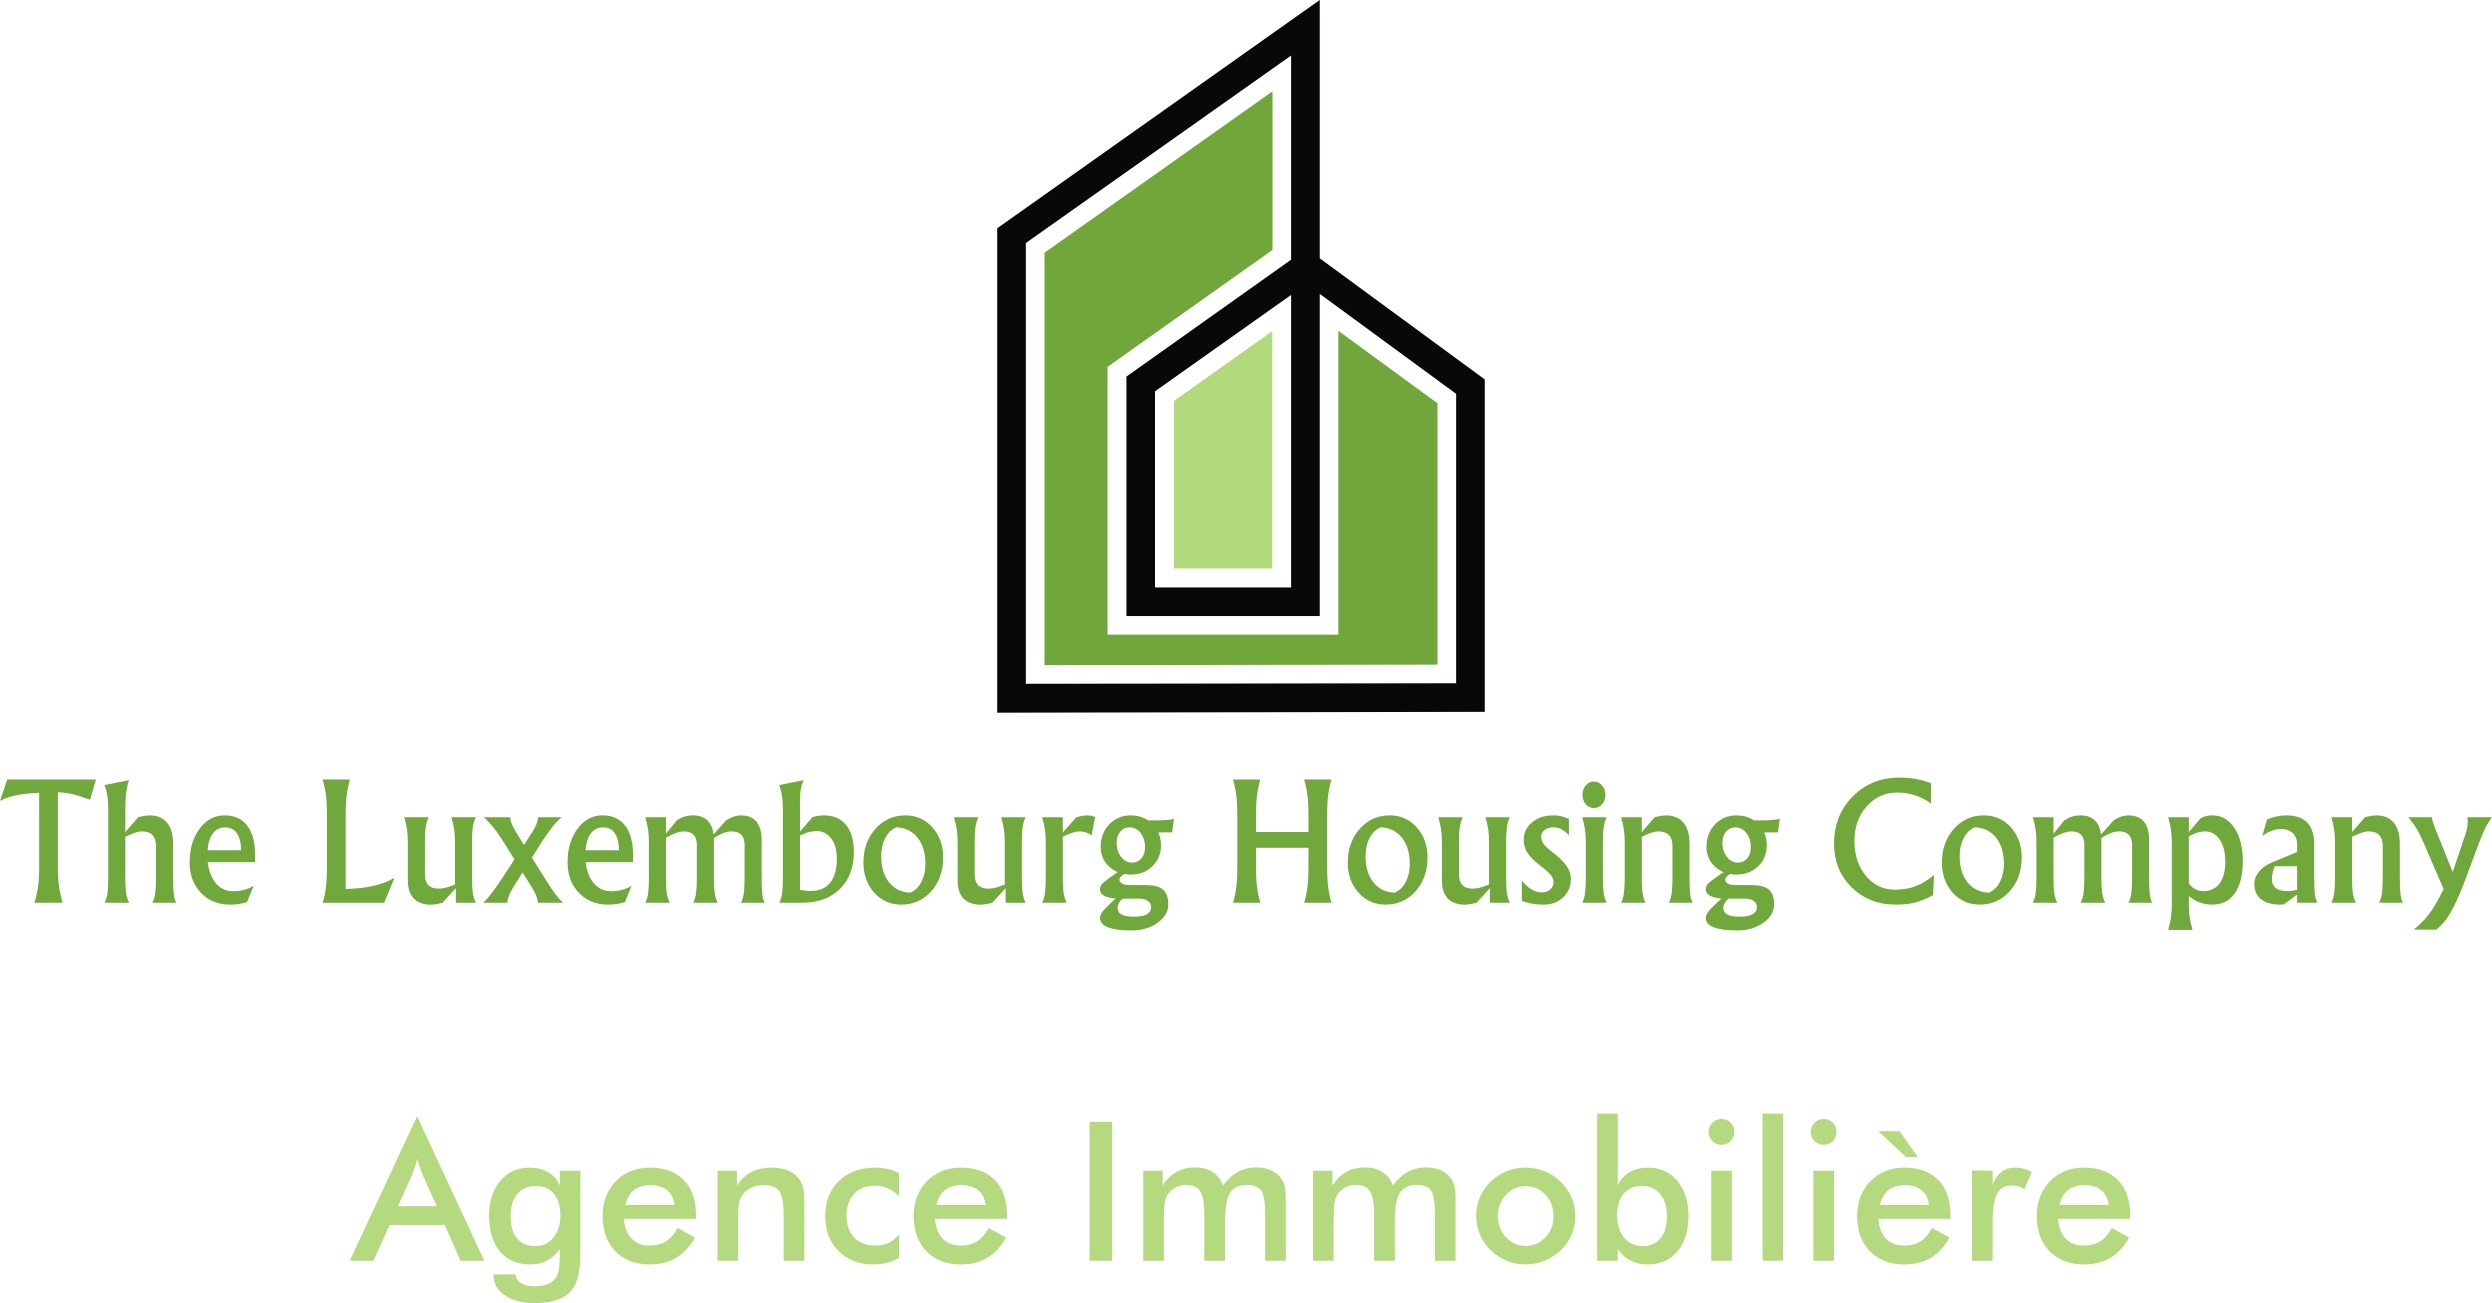 The Luxembourg Housing Company